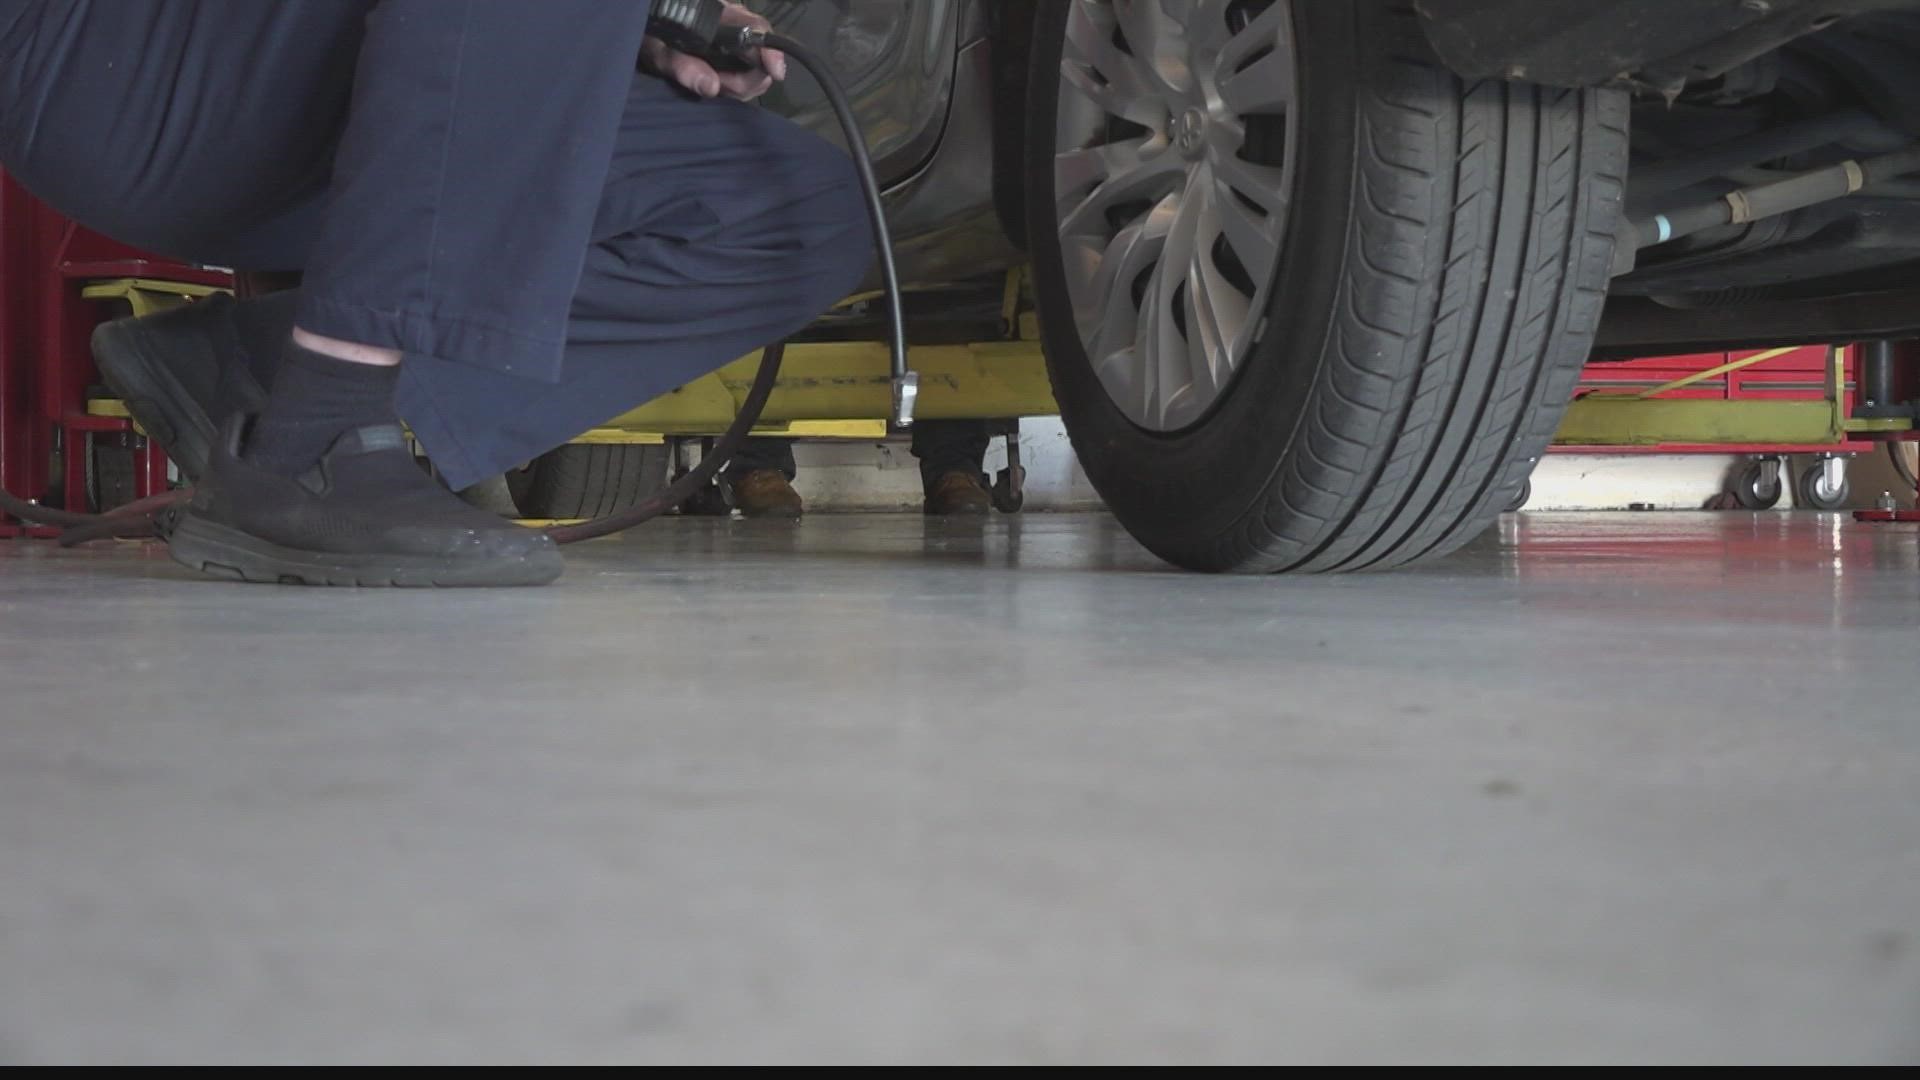 Get your car inspected before you travel for the holidays.